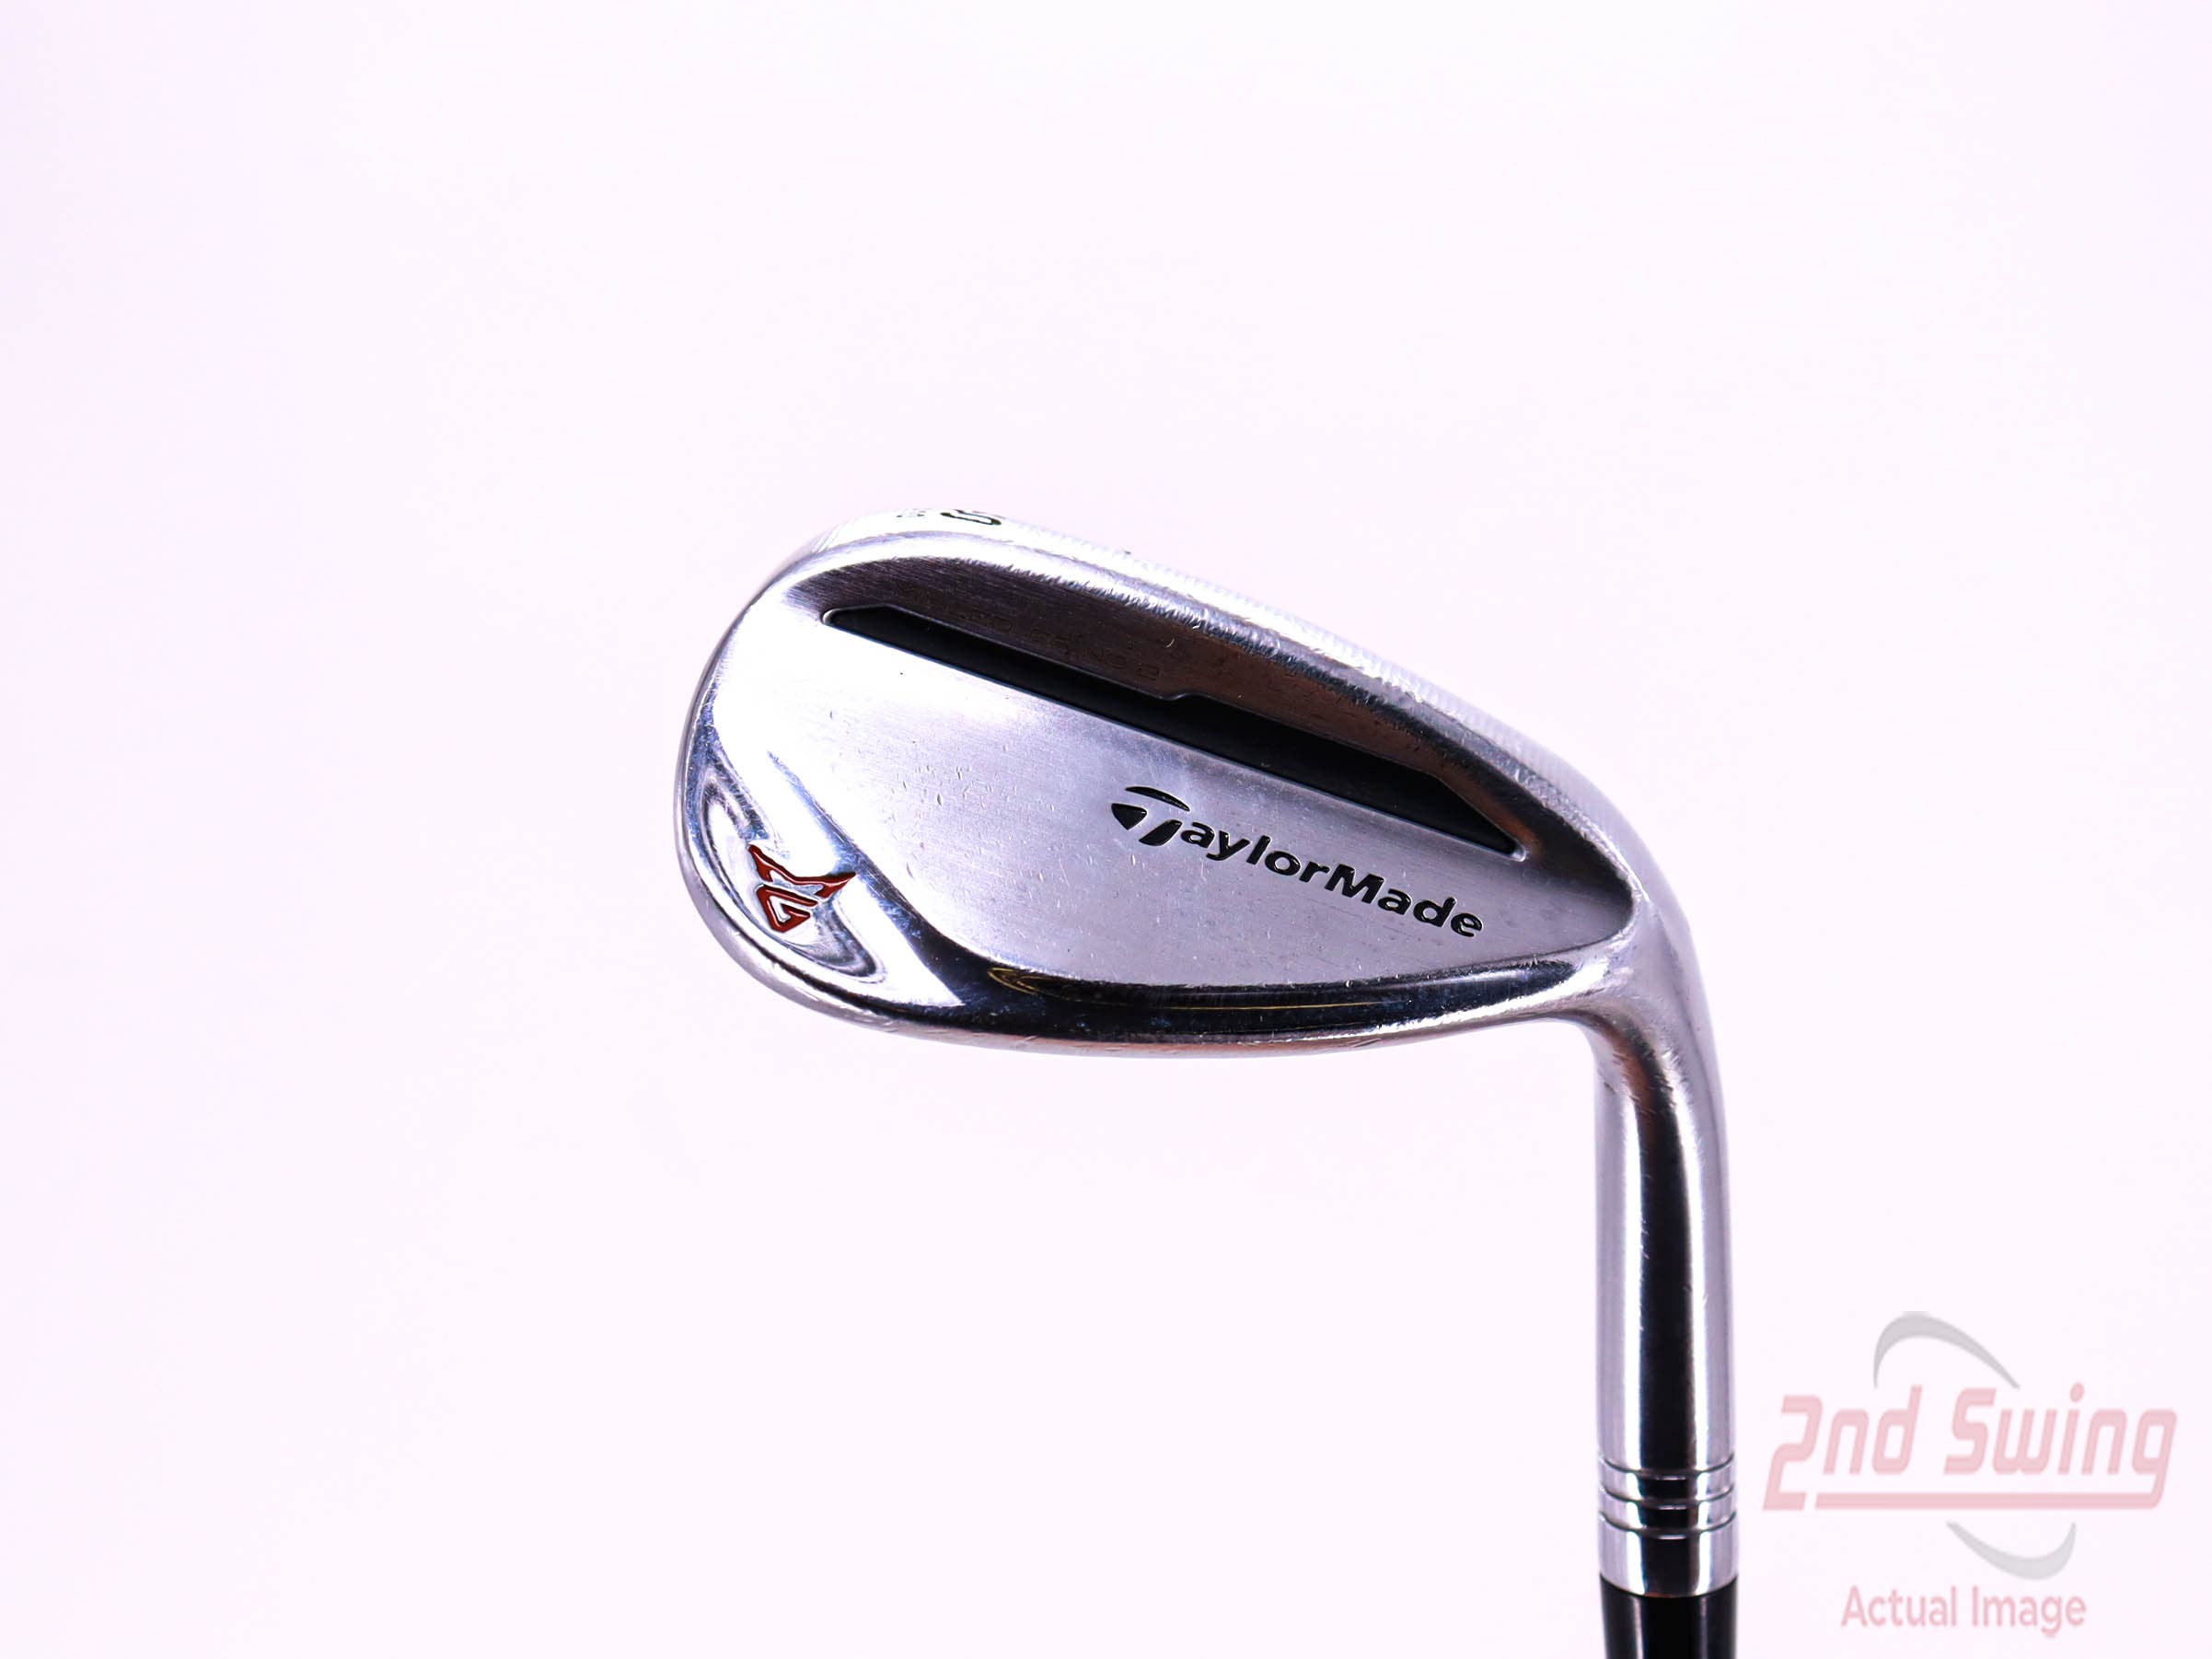 TaylorMade Milled Grind 2 Chrome Wedge | 2nd Swing Golf